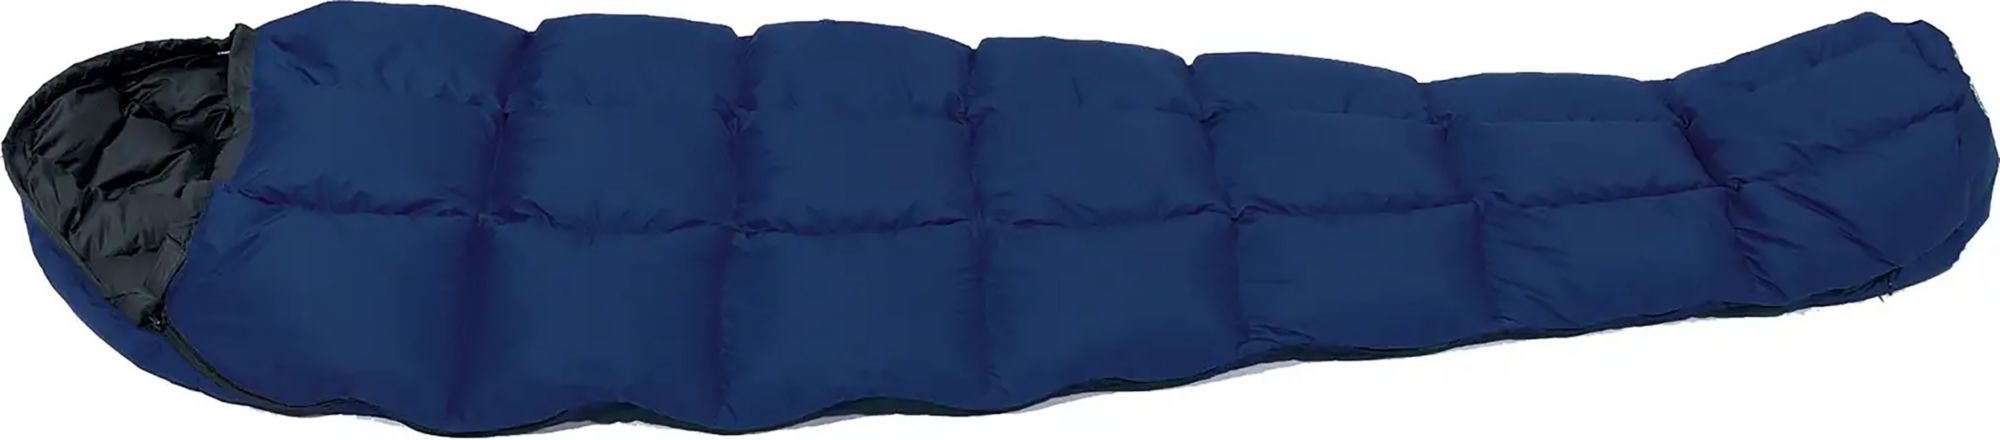 Photos - Suitcase / Backpack Cover Western Mountaineering Caribou MF 35 Degree Sleeping Bag, Men's, Navy Blue